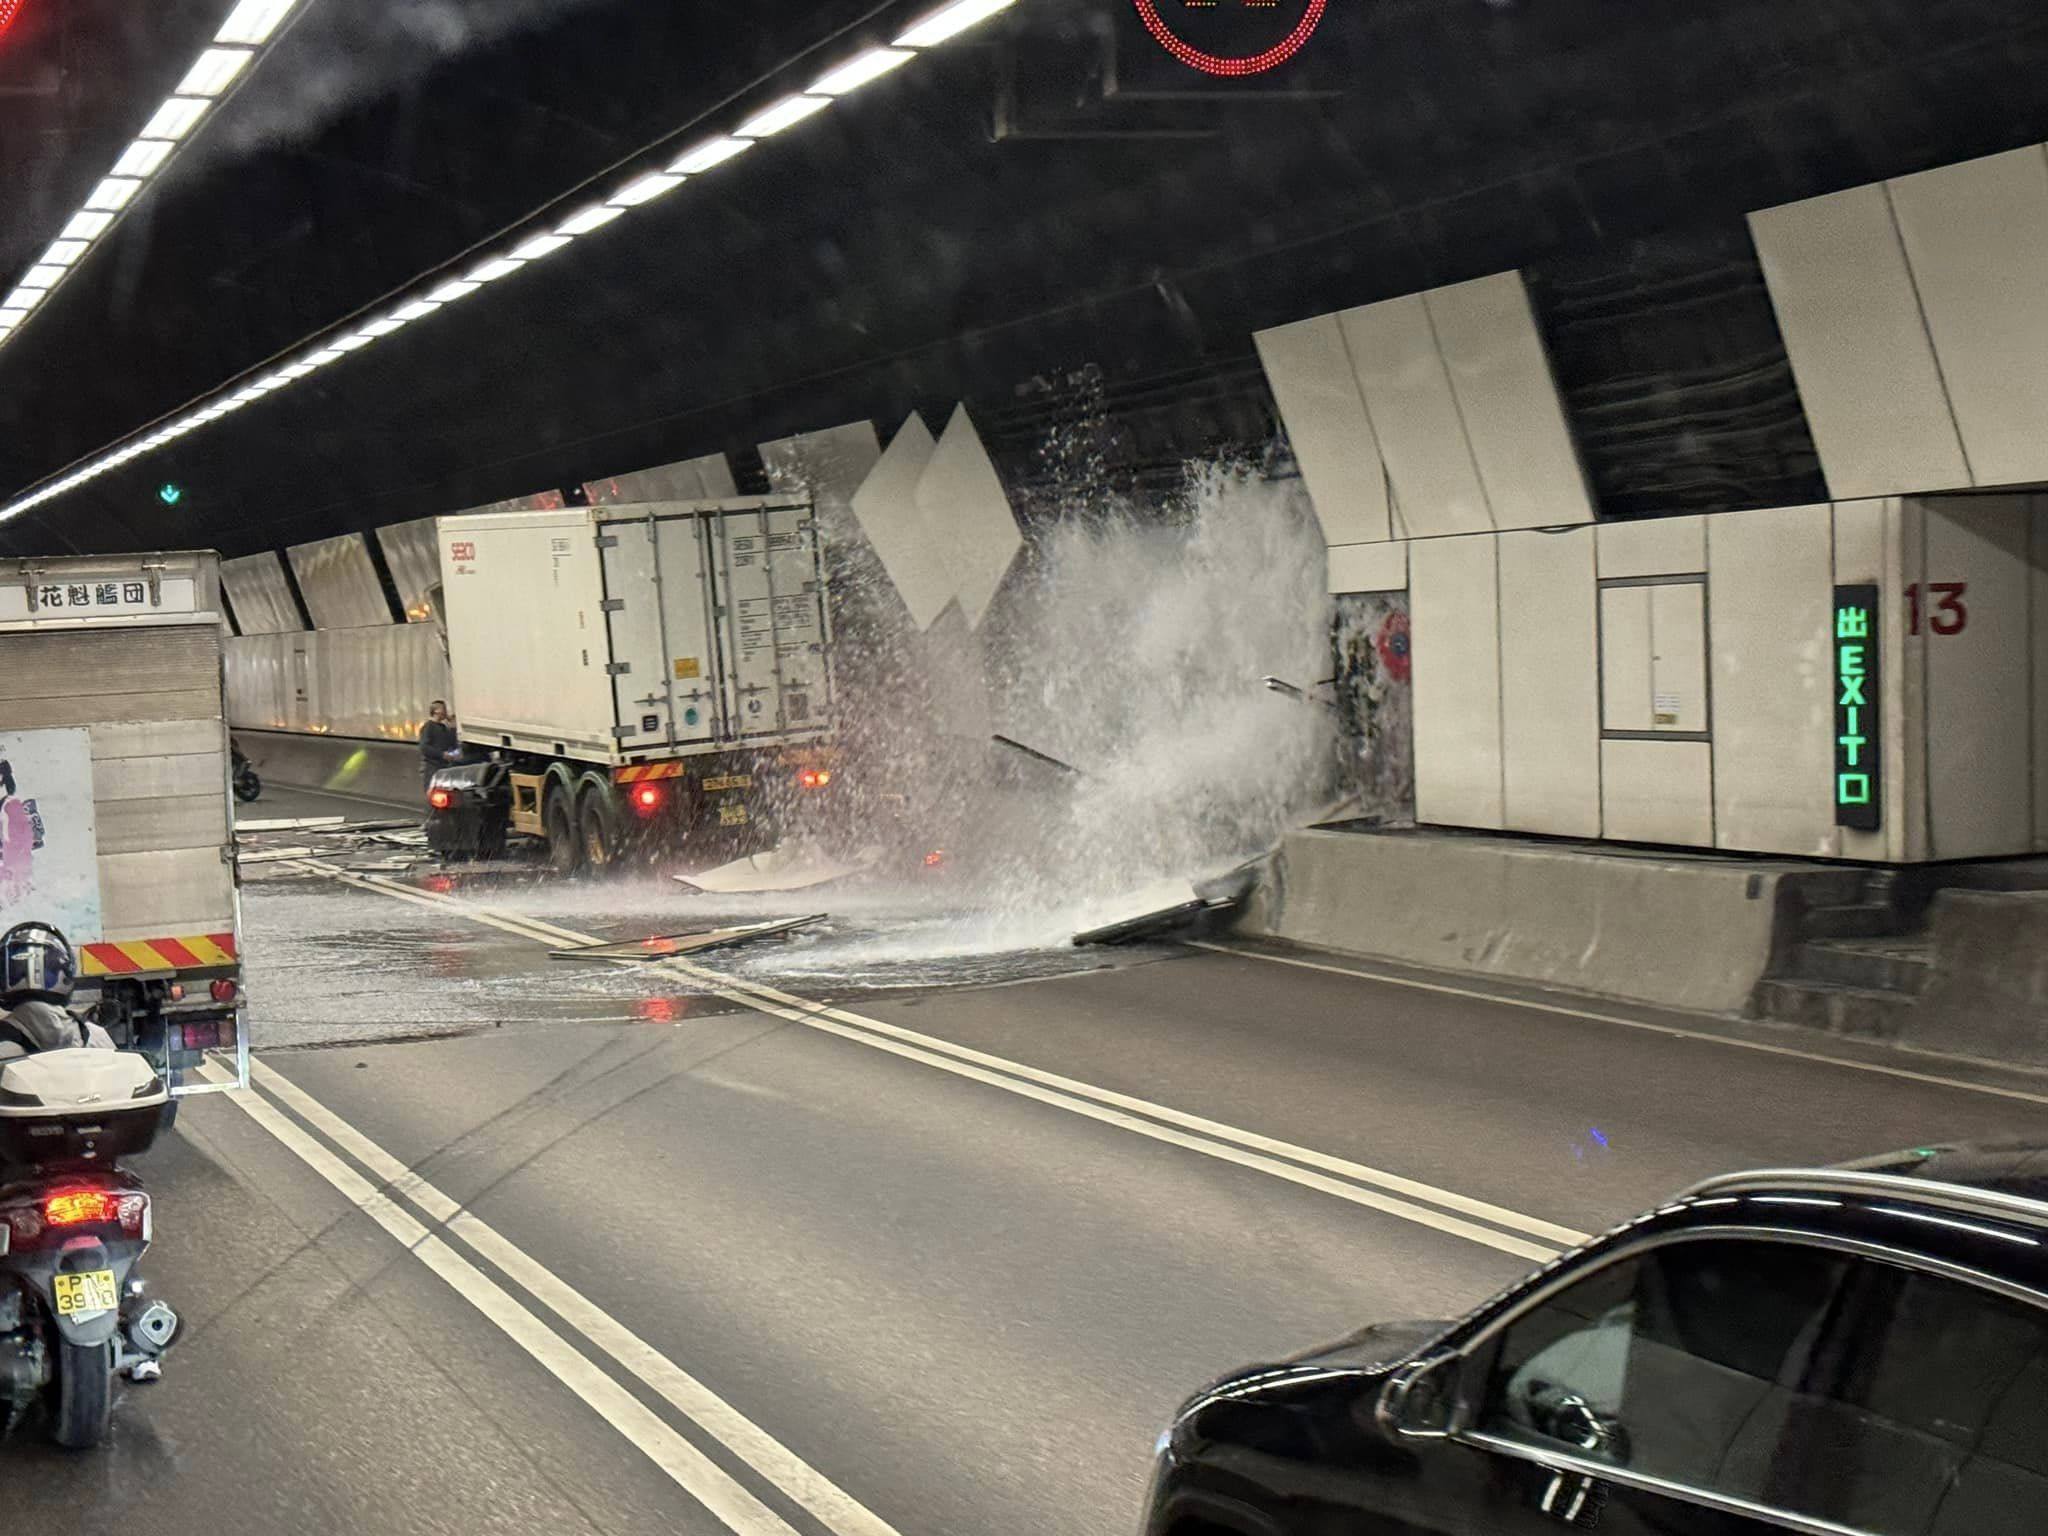 A medium goods vehicle crashed and ruptured a section of the tunnel’s inner pipes. Photo: Facebook/Kit Jai